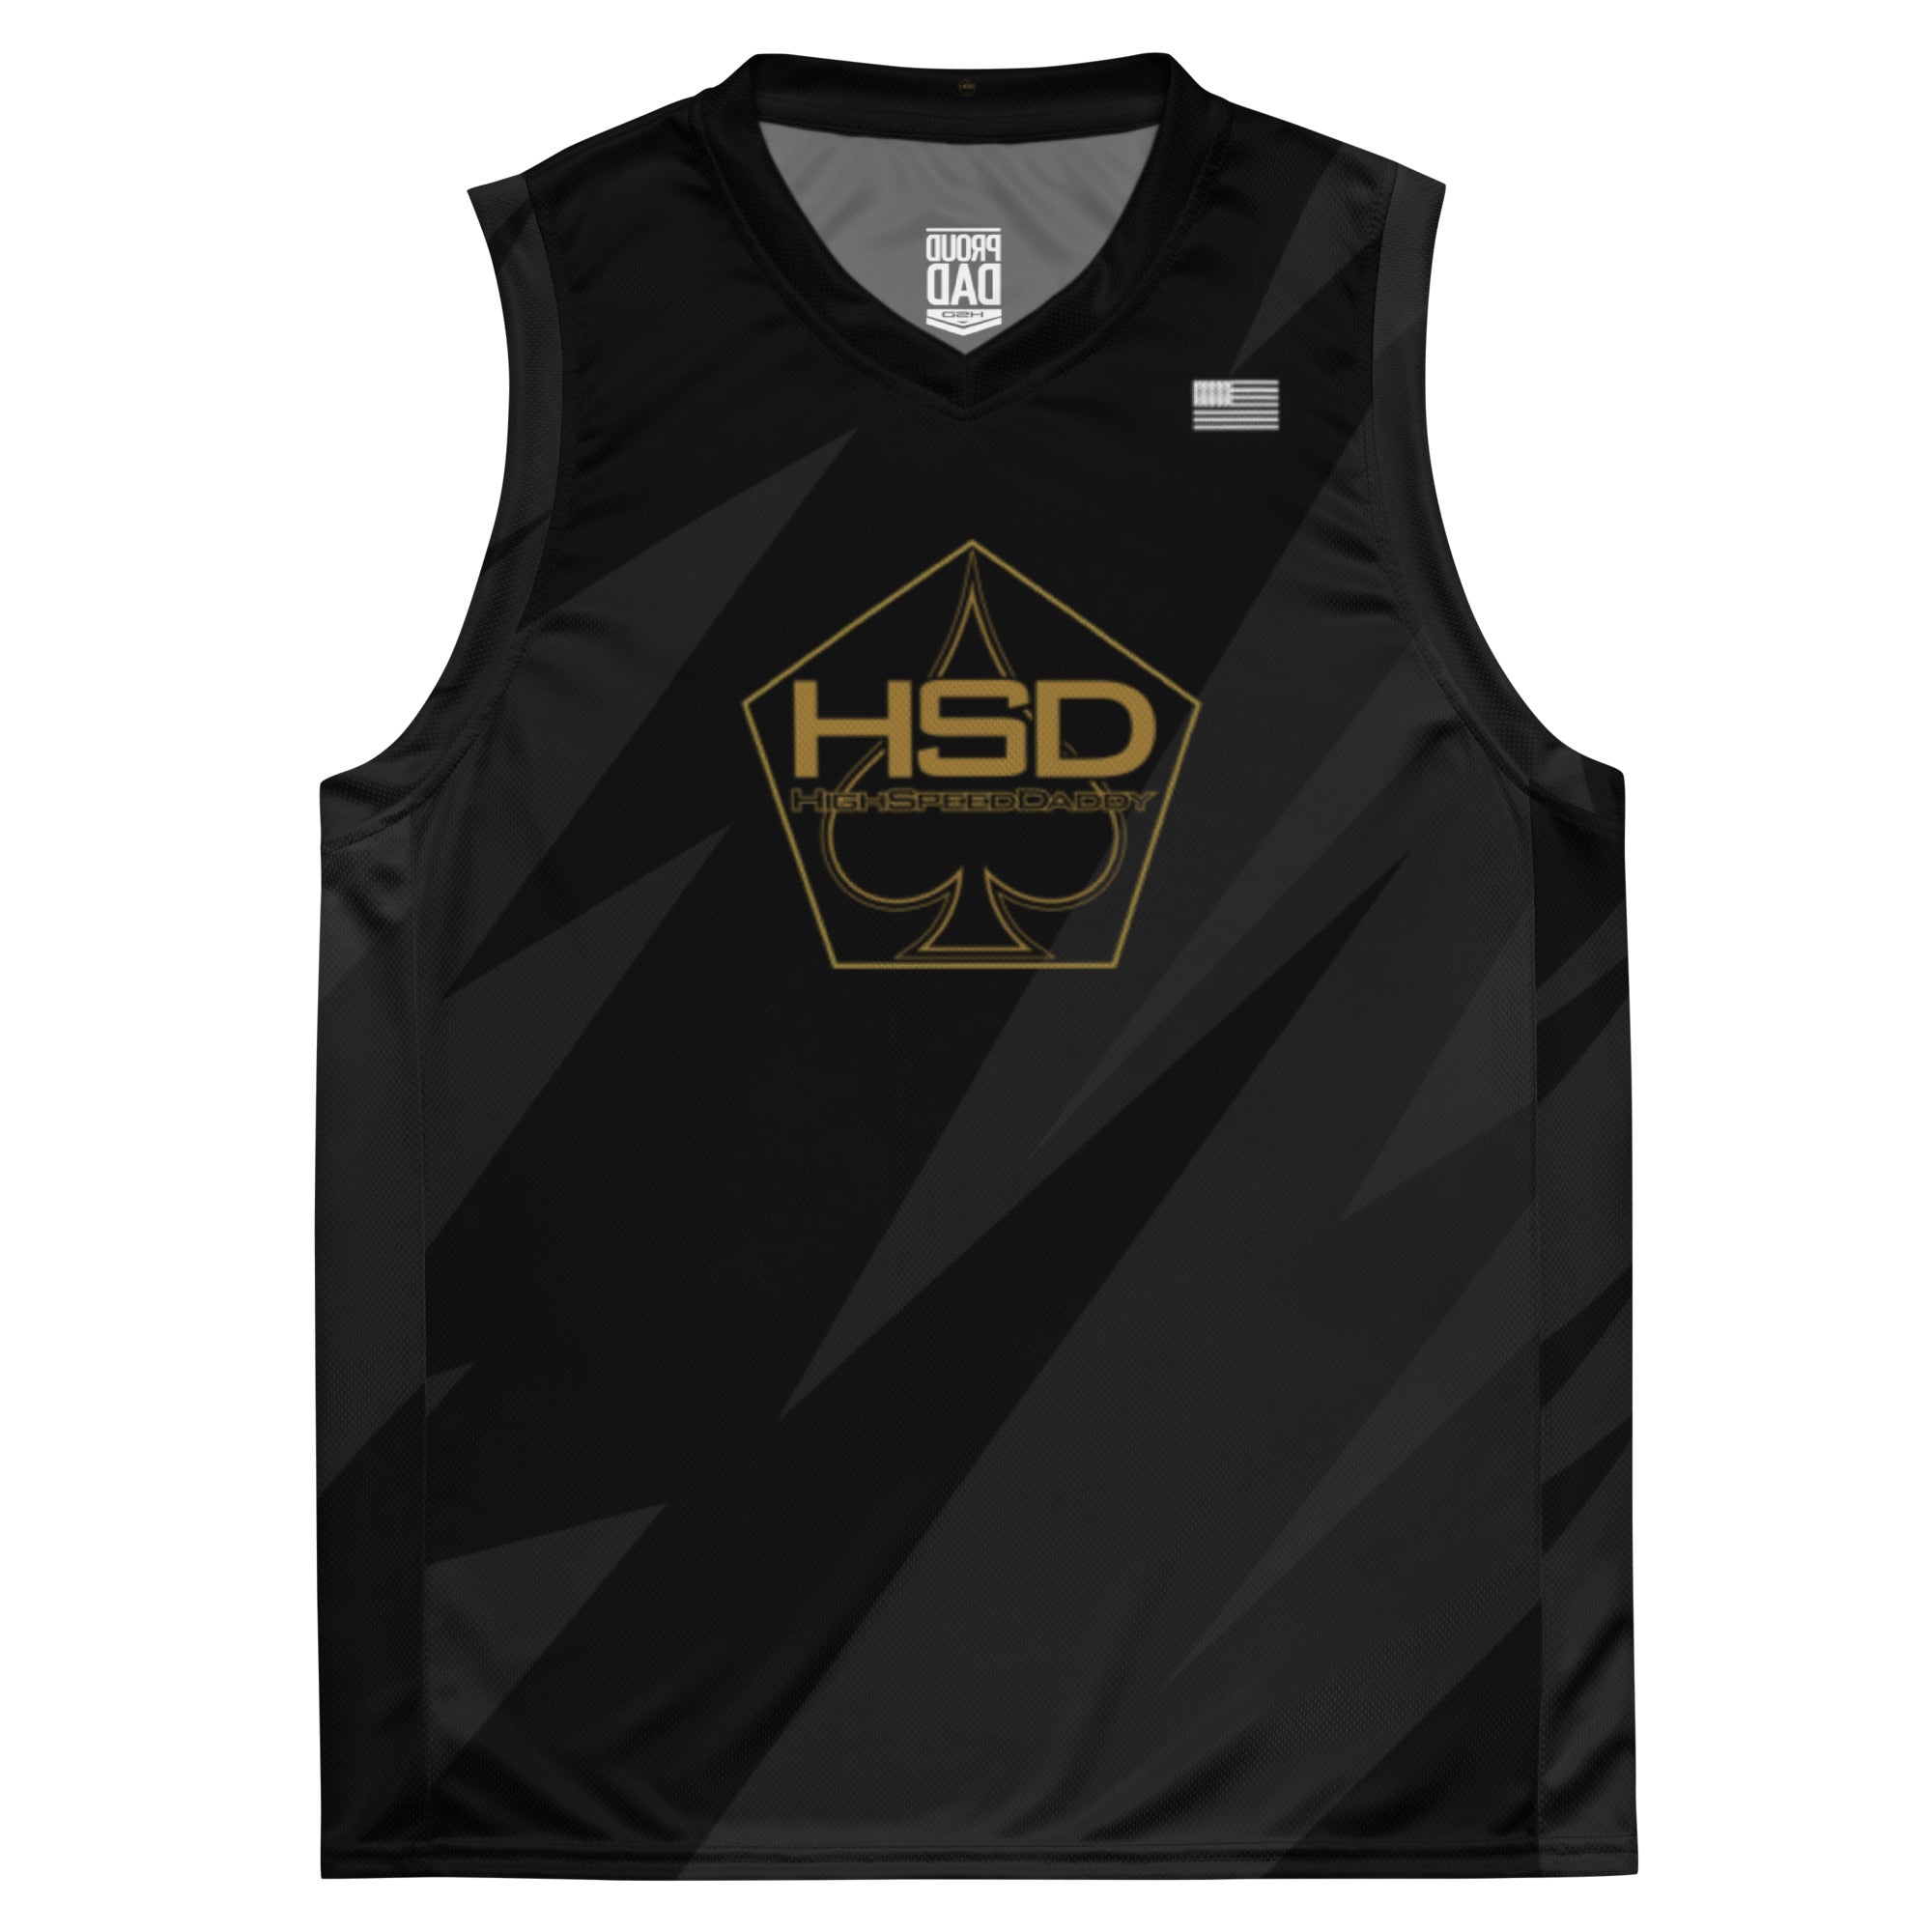 HSD Recycled Basketball Jersey